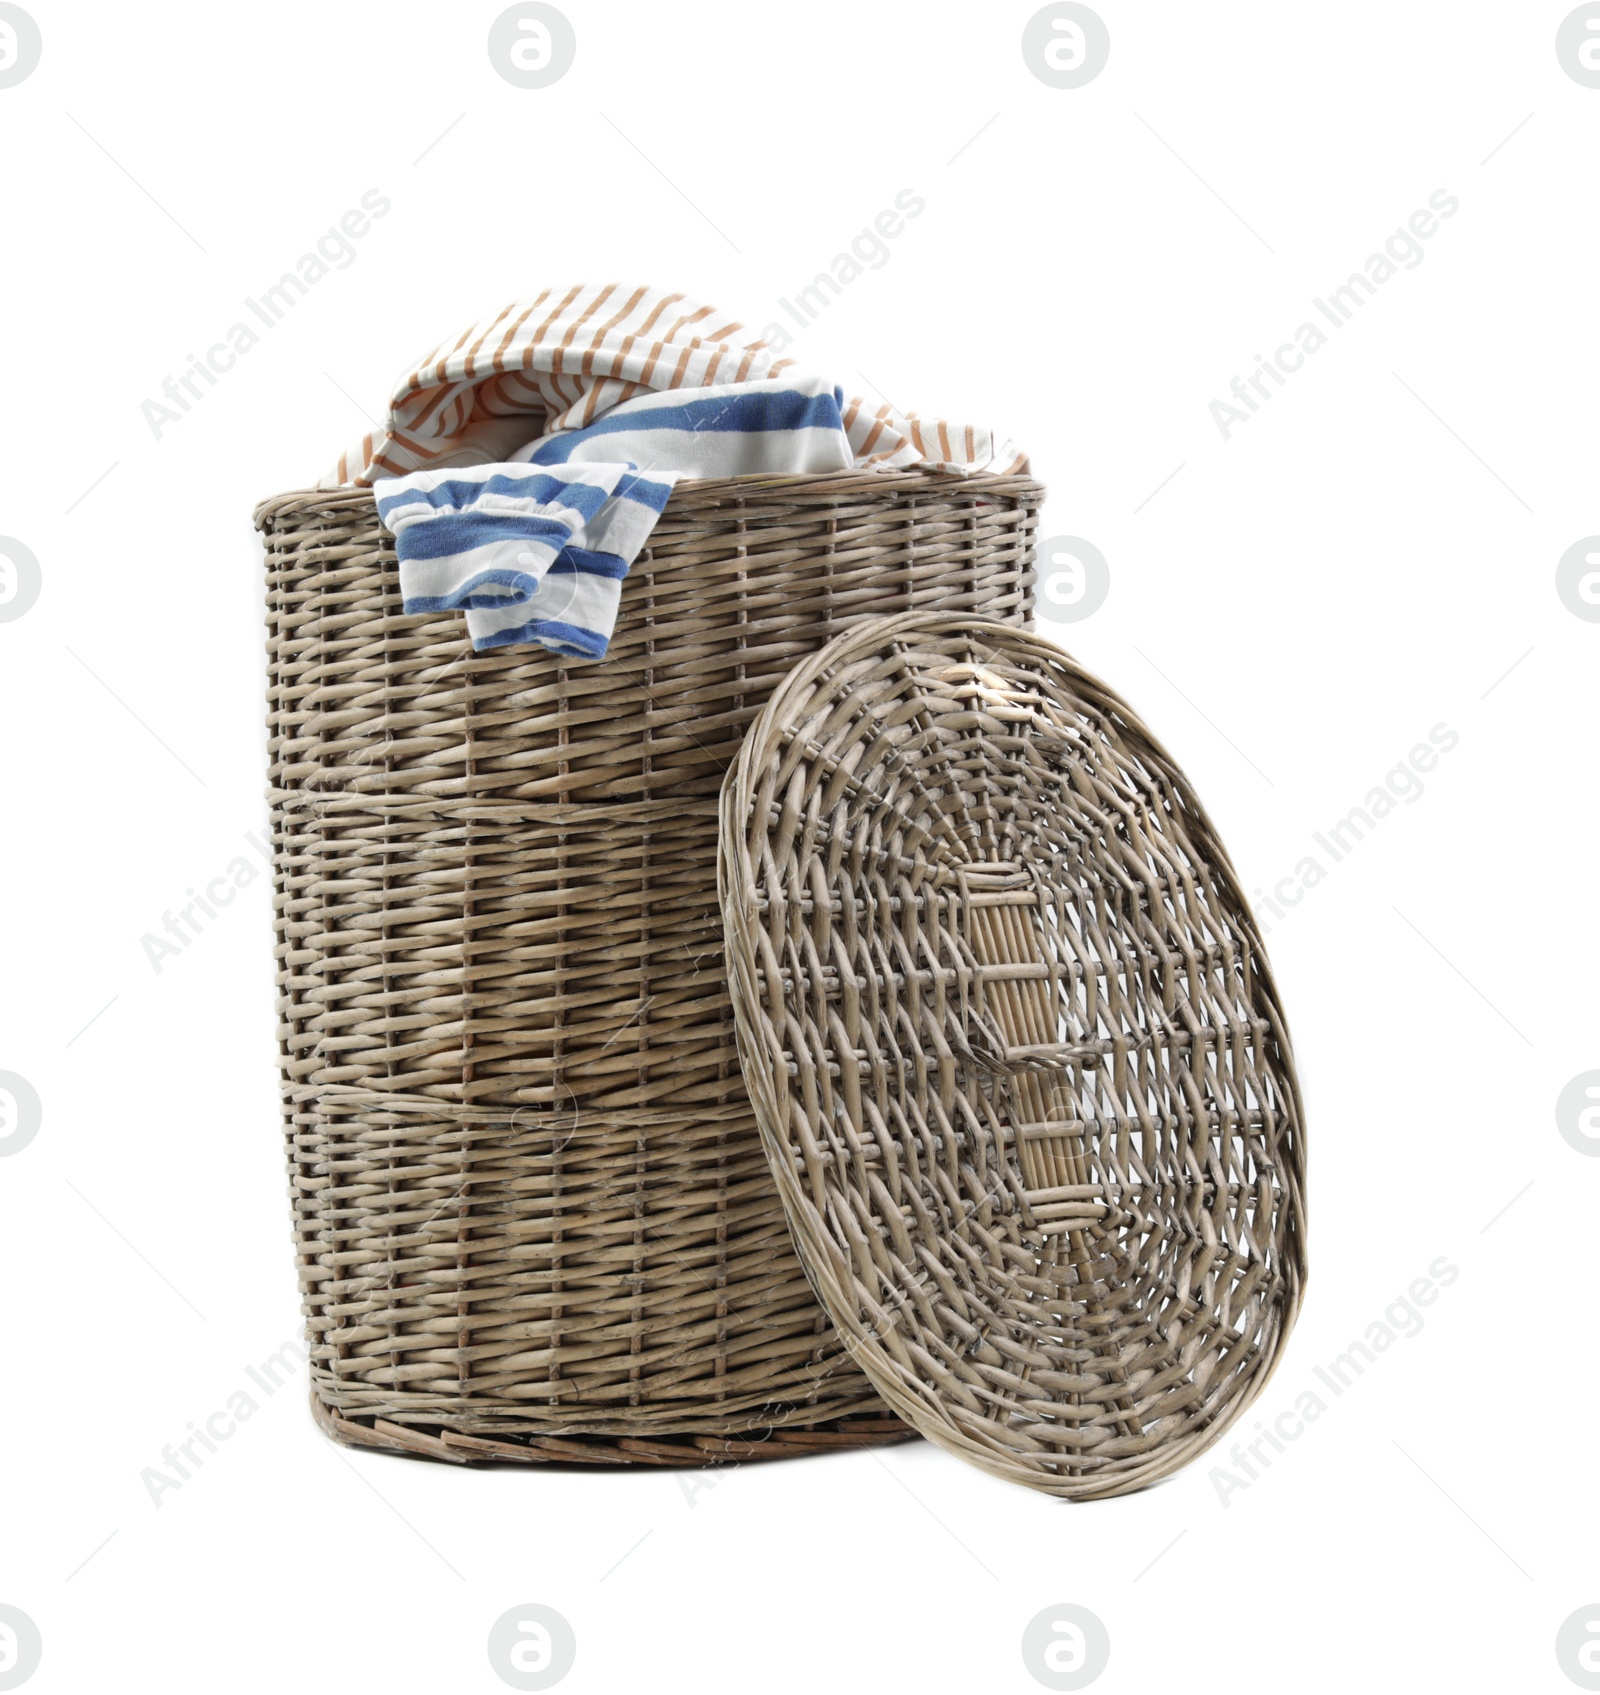 Photo of Wicker laundry basket with dirty clothes on white background